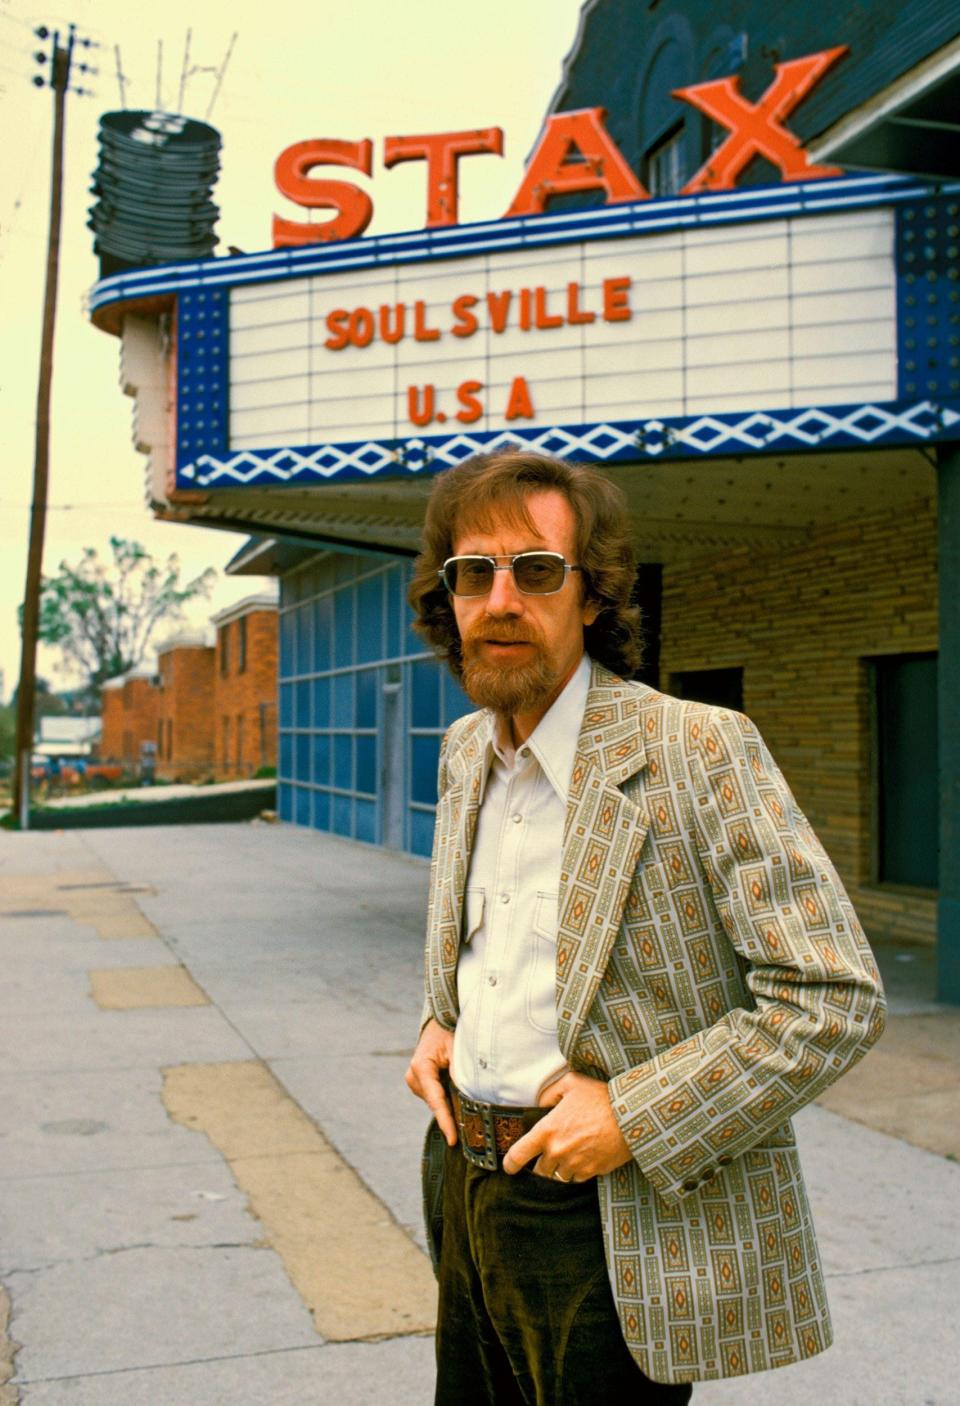 Stewart outside Stax in 1973 - David Reed Archive/Alamy